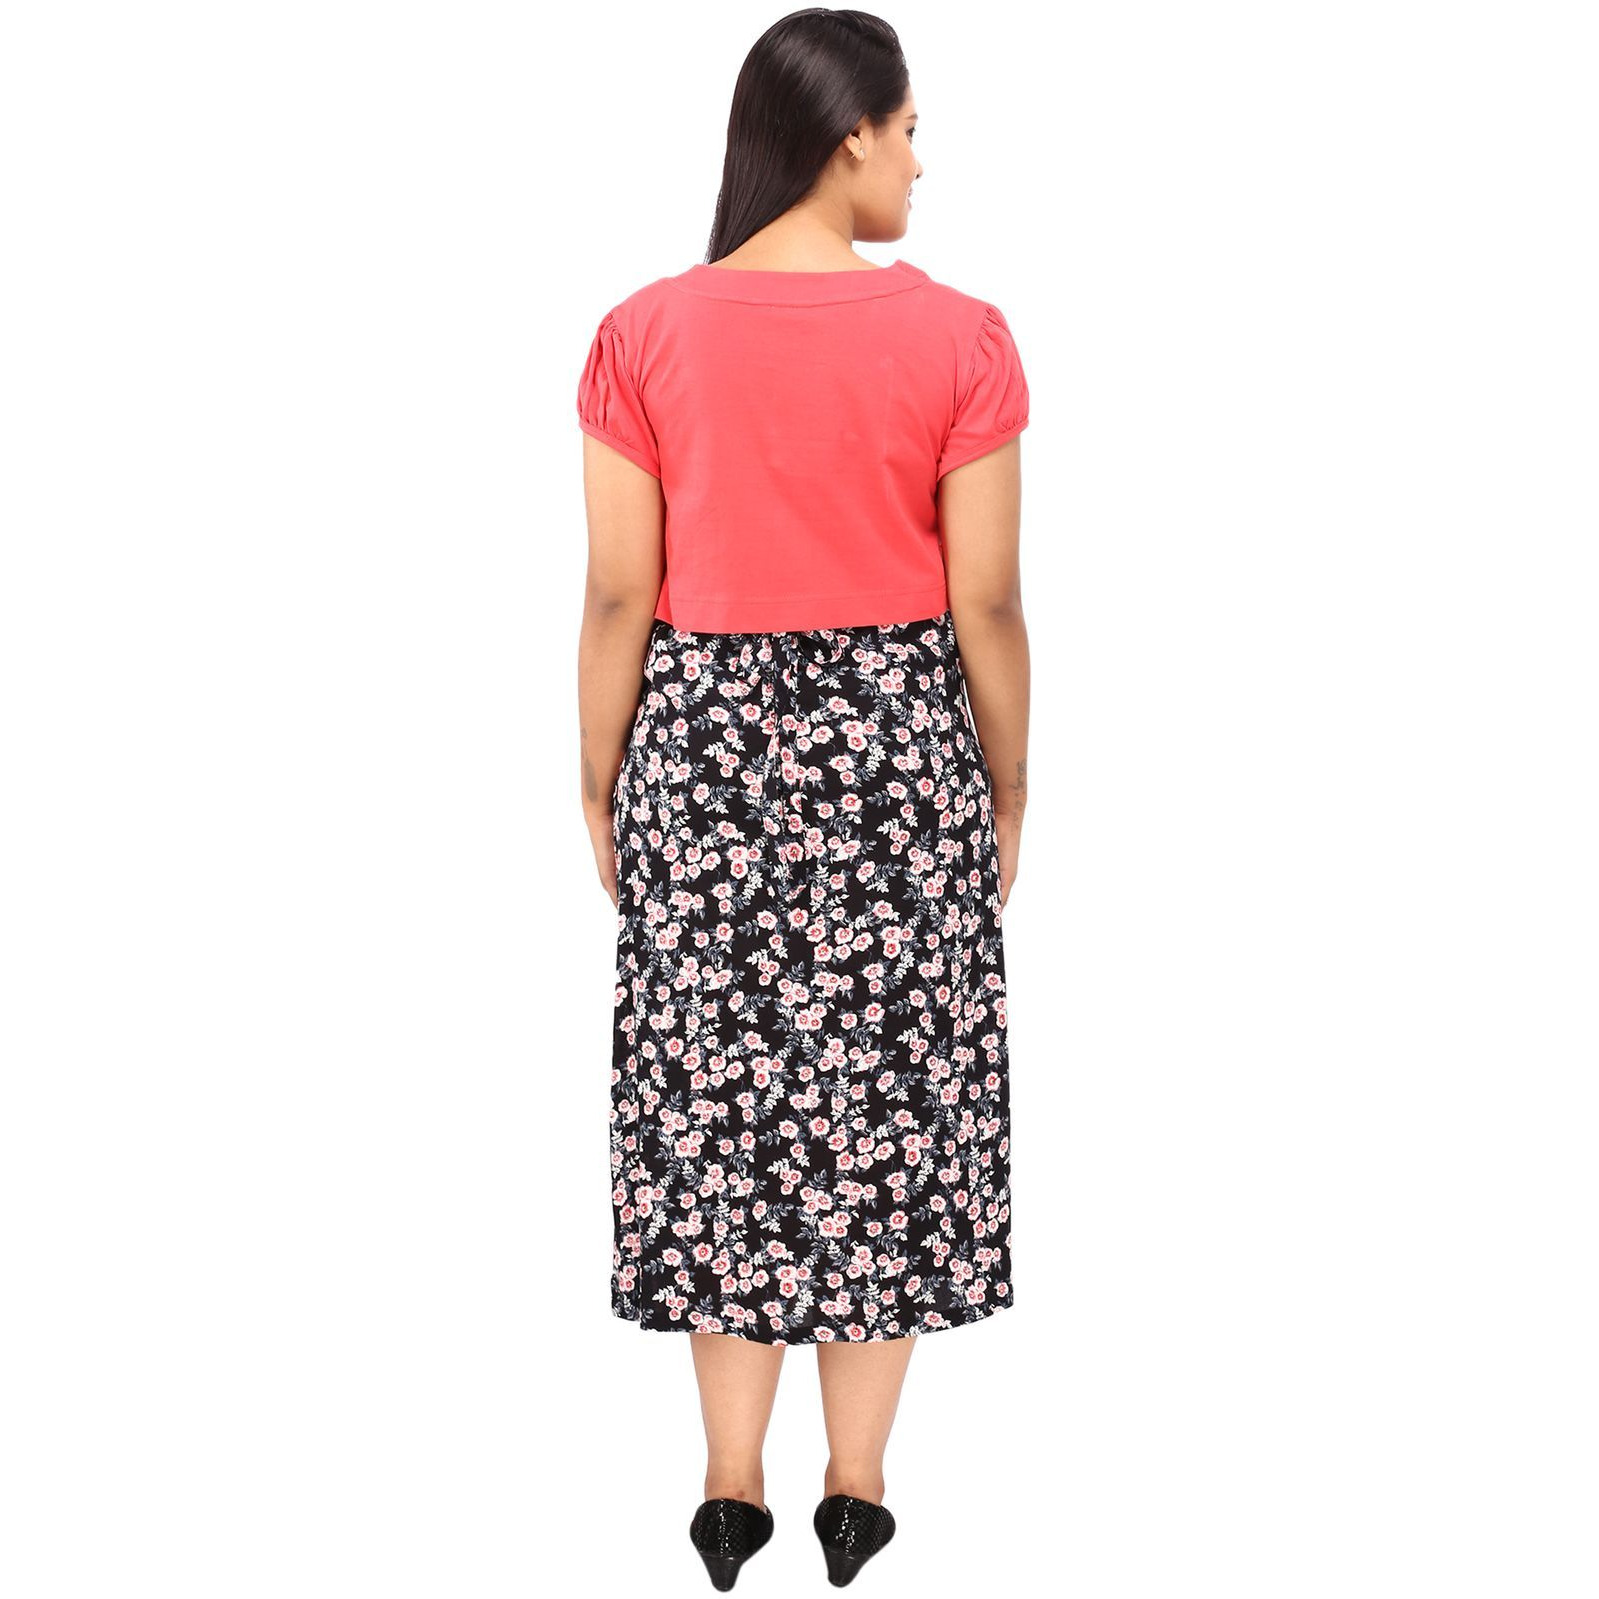 Mamma's Maternity Women's Peach and Black Floral Maternity Dress